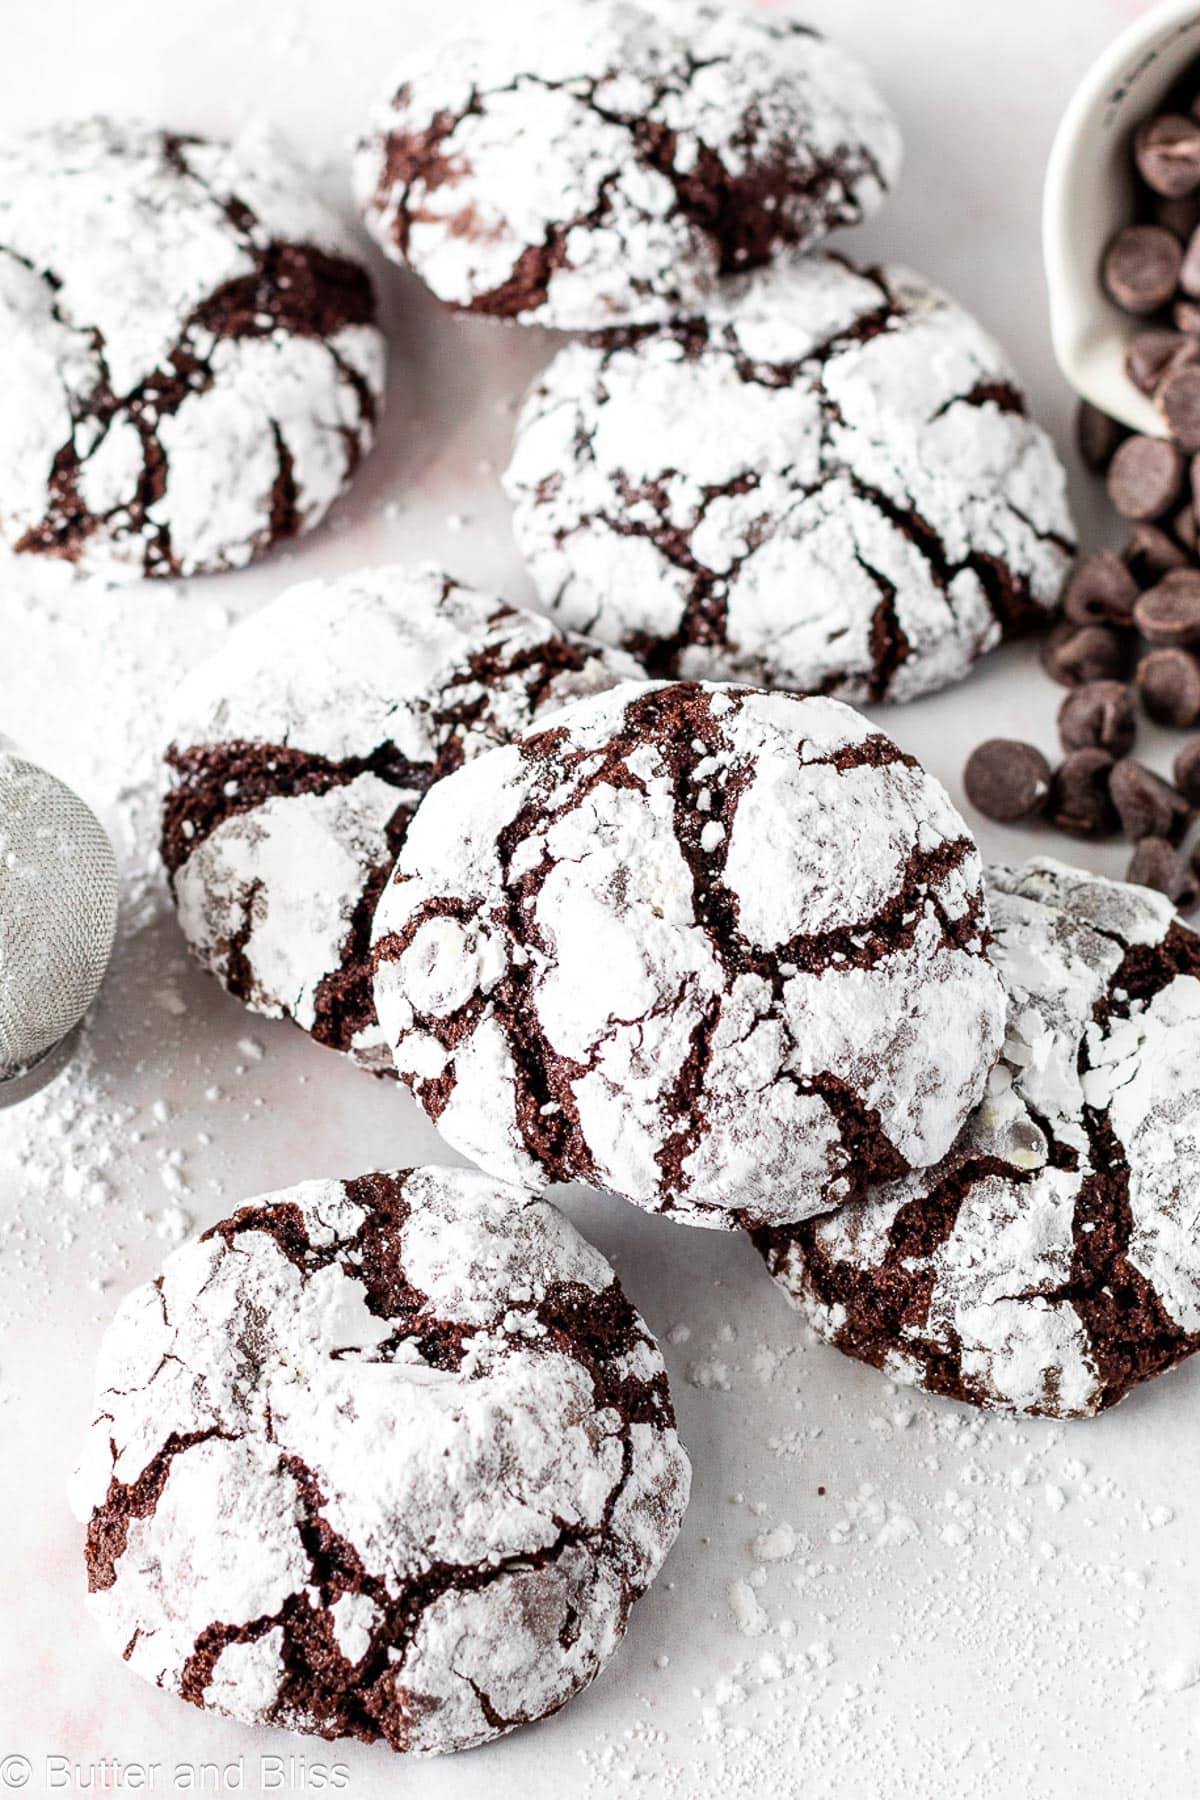 Small batch of chocolate crinkle cookies scattered on a table.